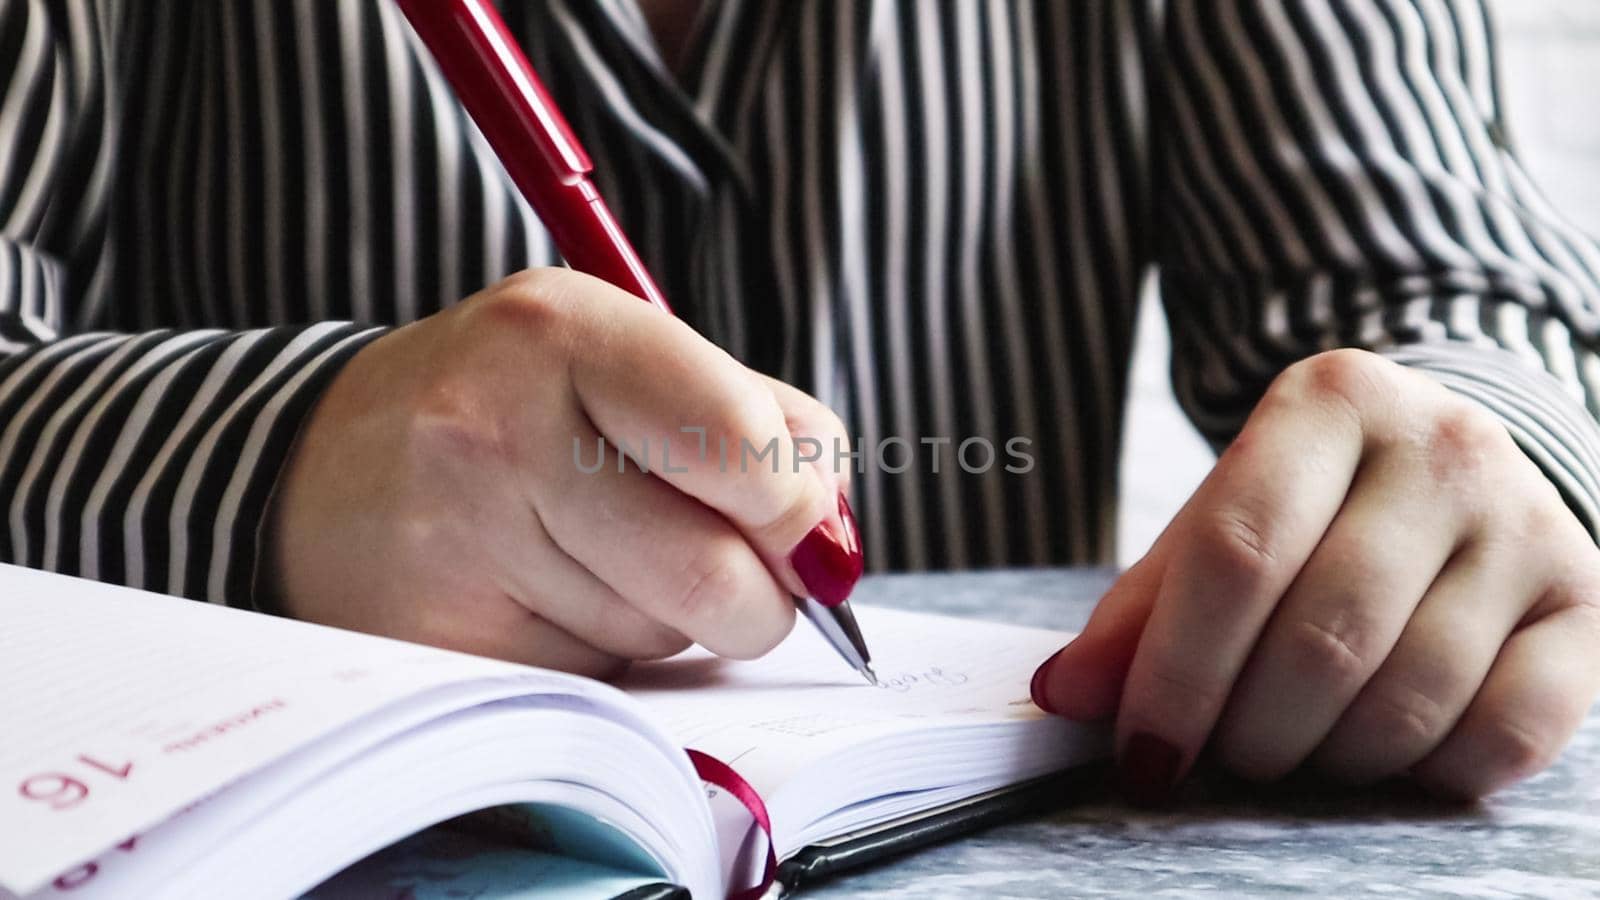 Side view of the hands of a woman with red nails, holding a red pen, writes something on an empty sheet of diary paper lying on a gray table. Girl makes notes in a black notebook.